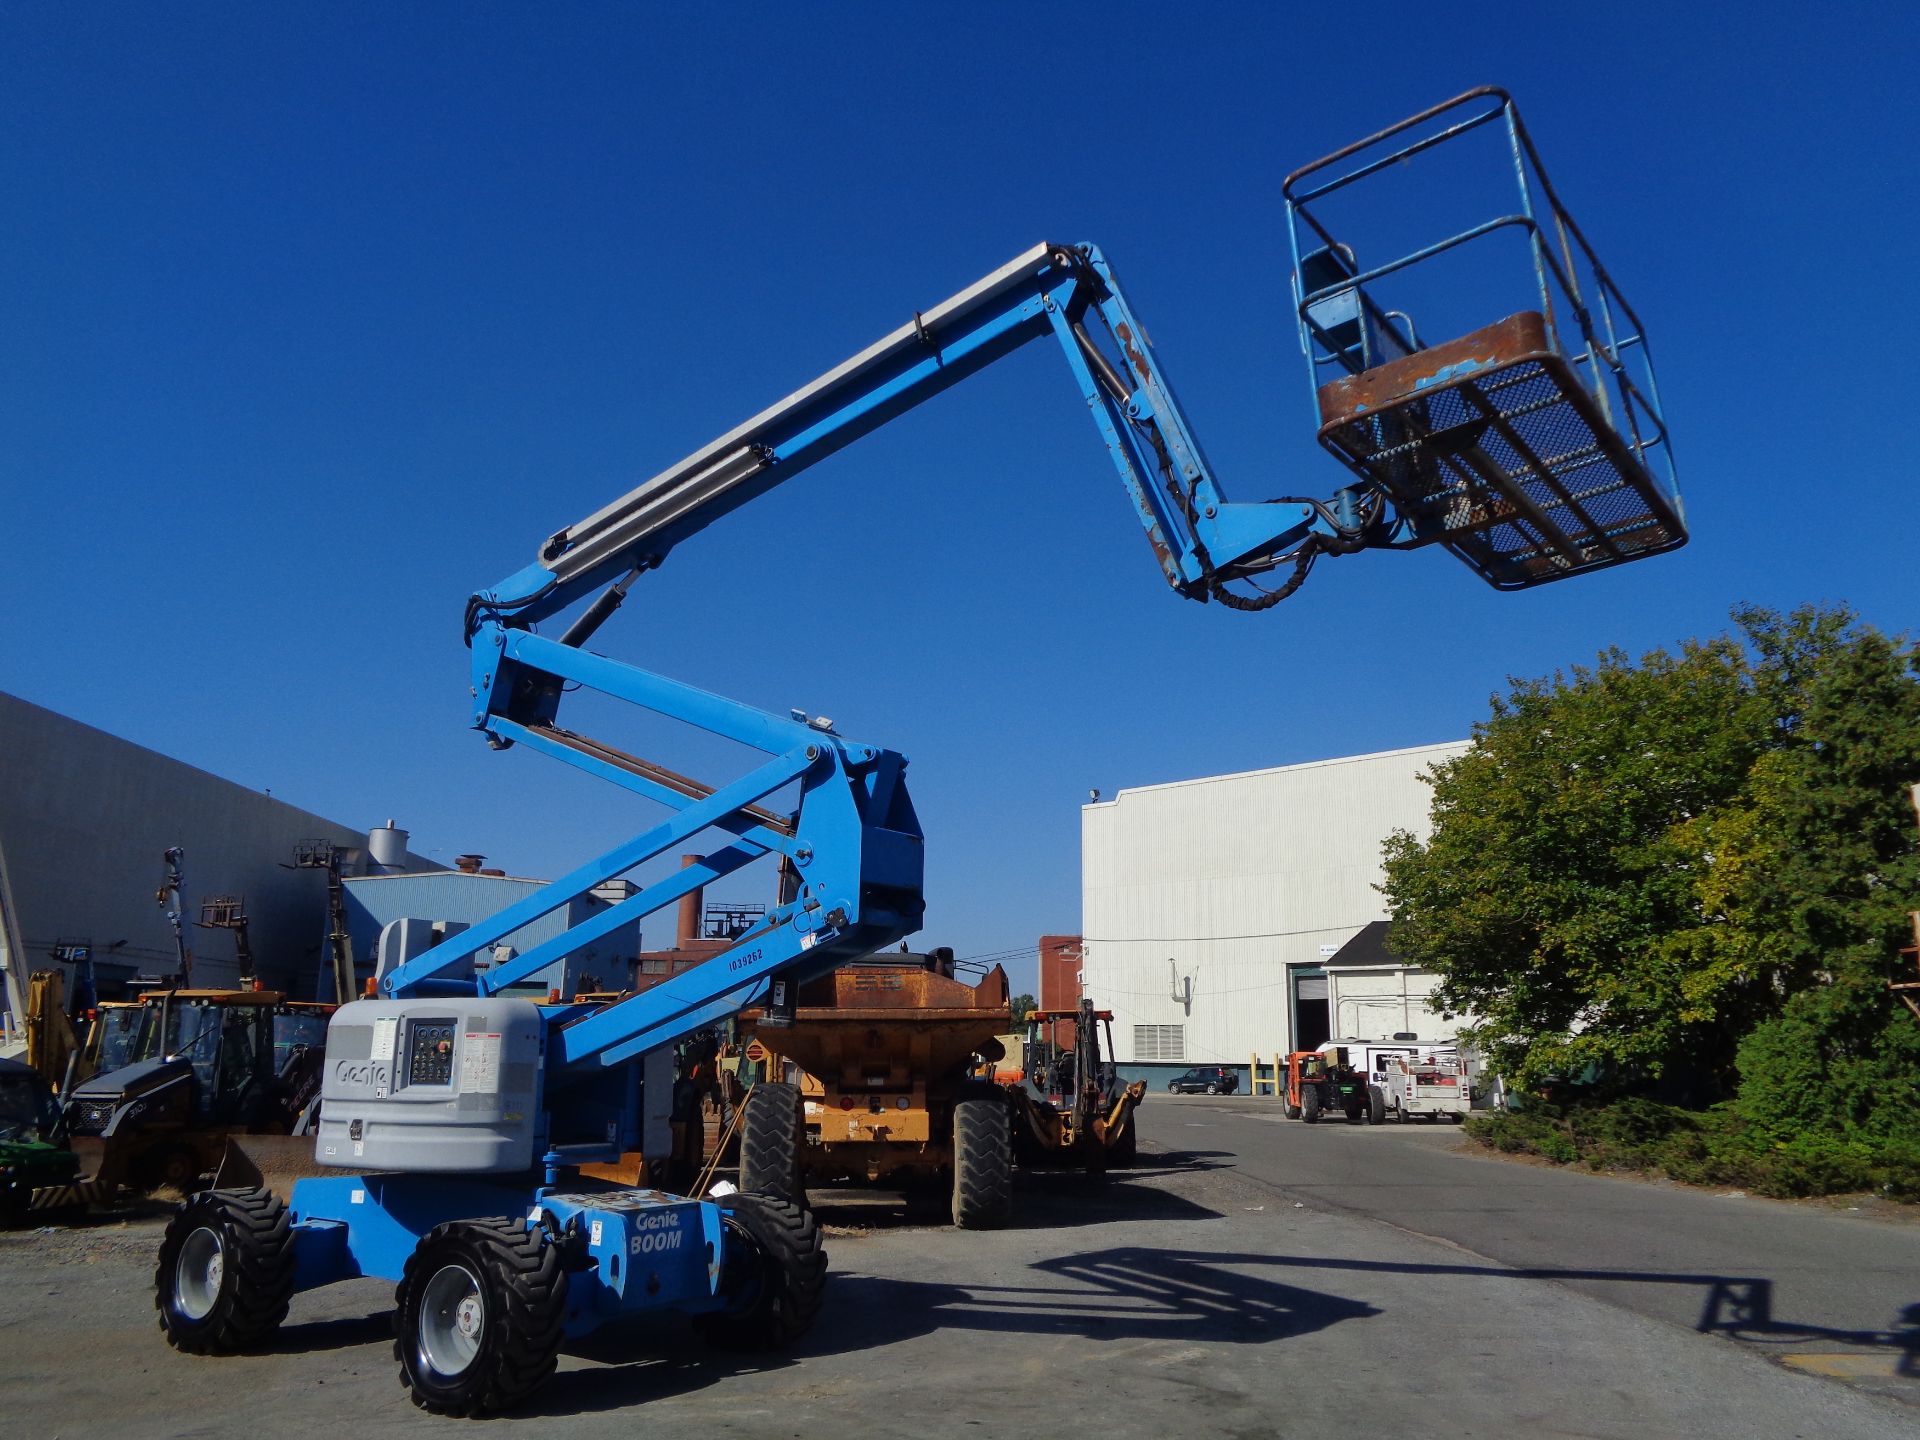 2008 Genie Z60 34 Articulating Boom Man Aerial Lift - Image 16 of 20